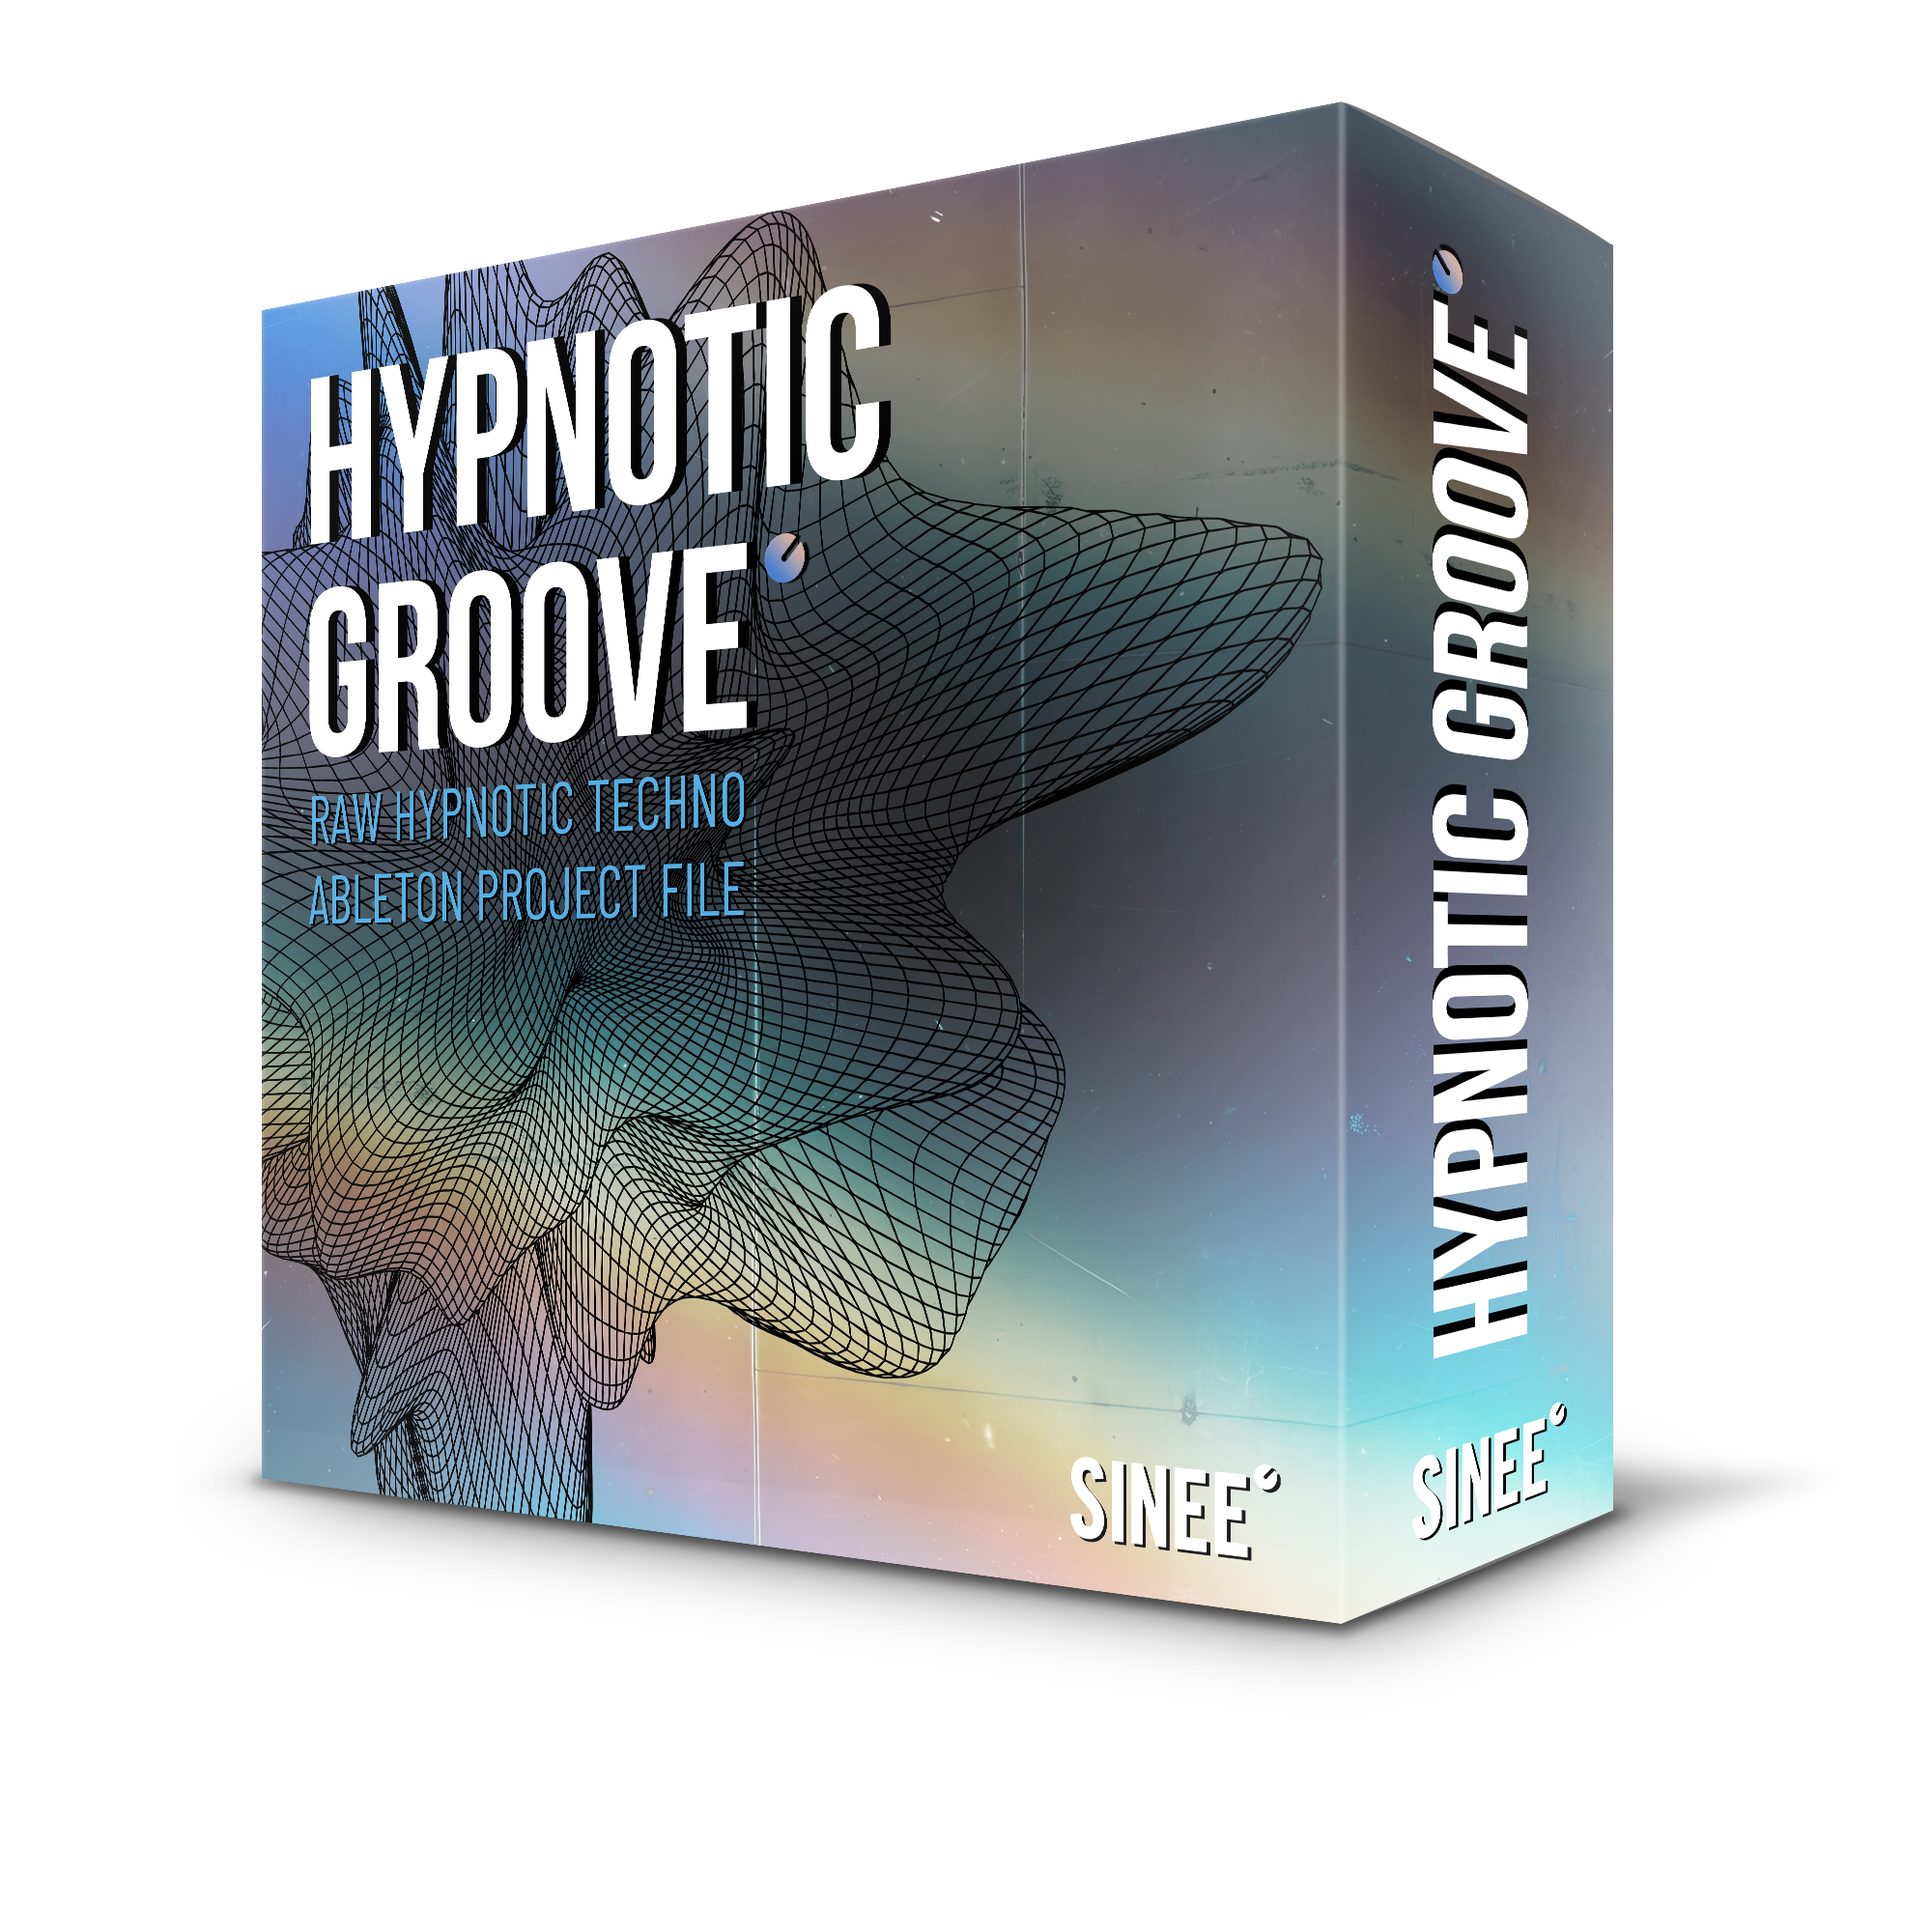 Hypnotic Groove Techno - Ableton Live Project File